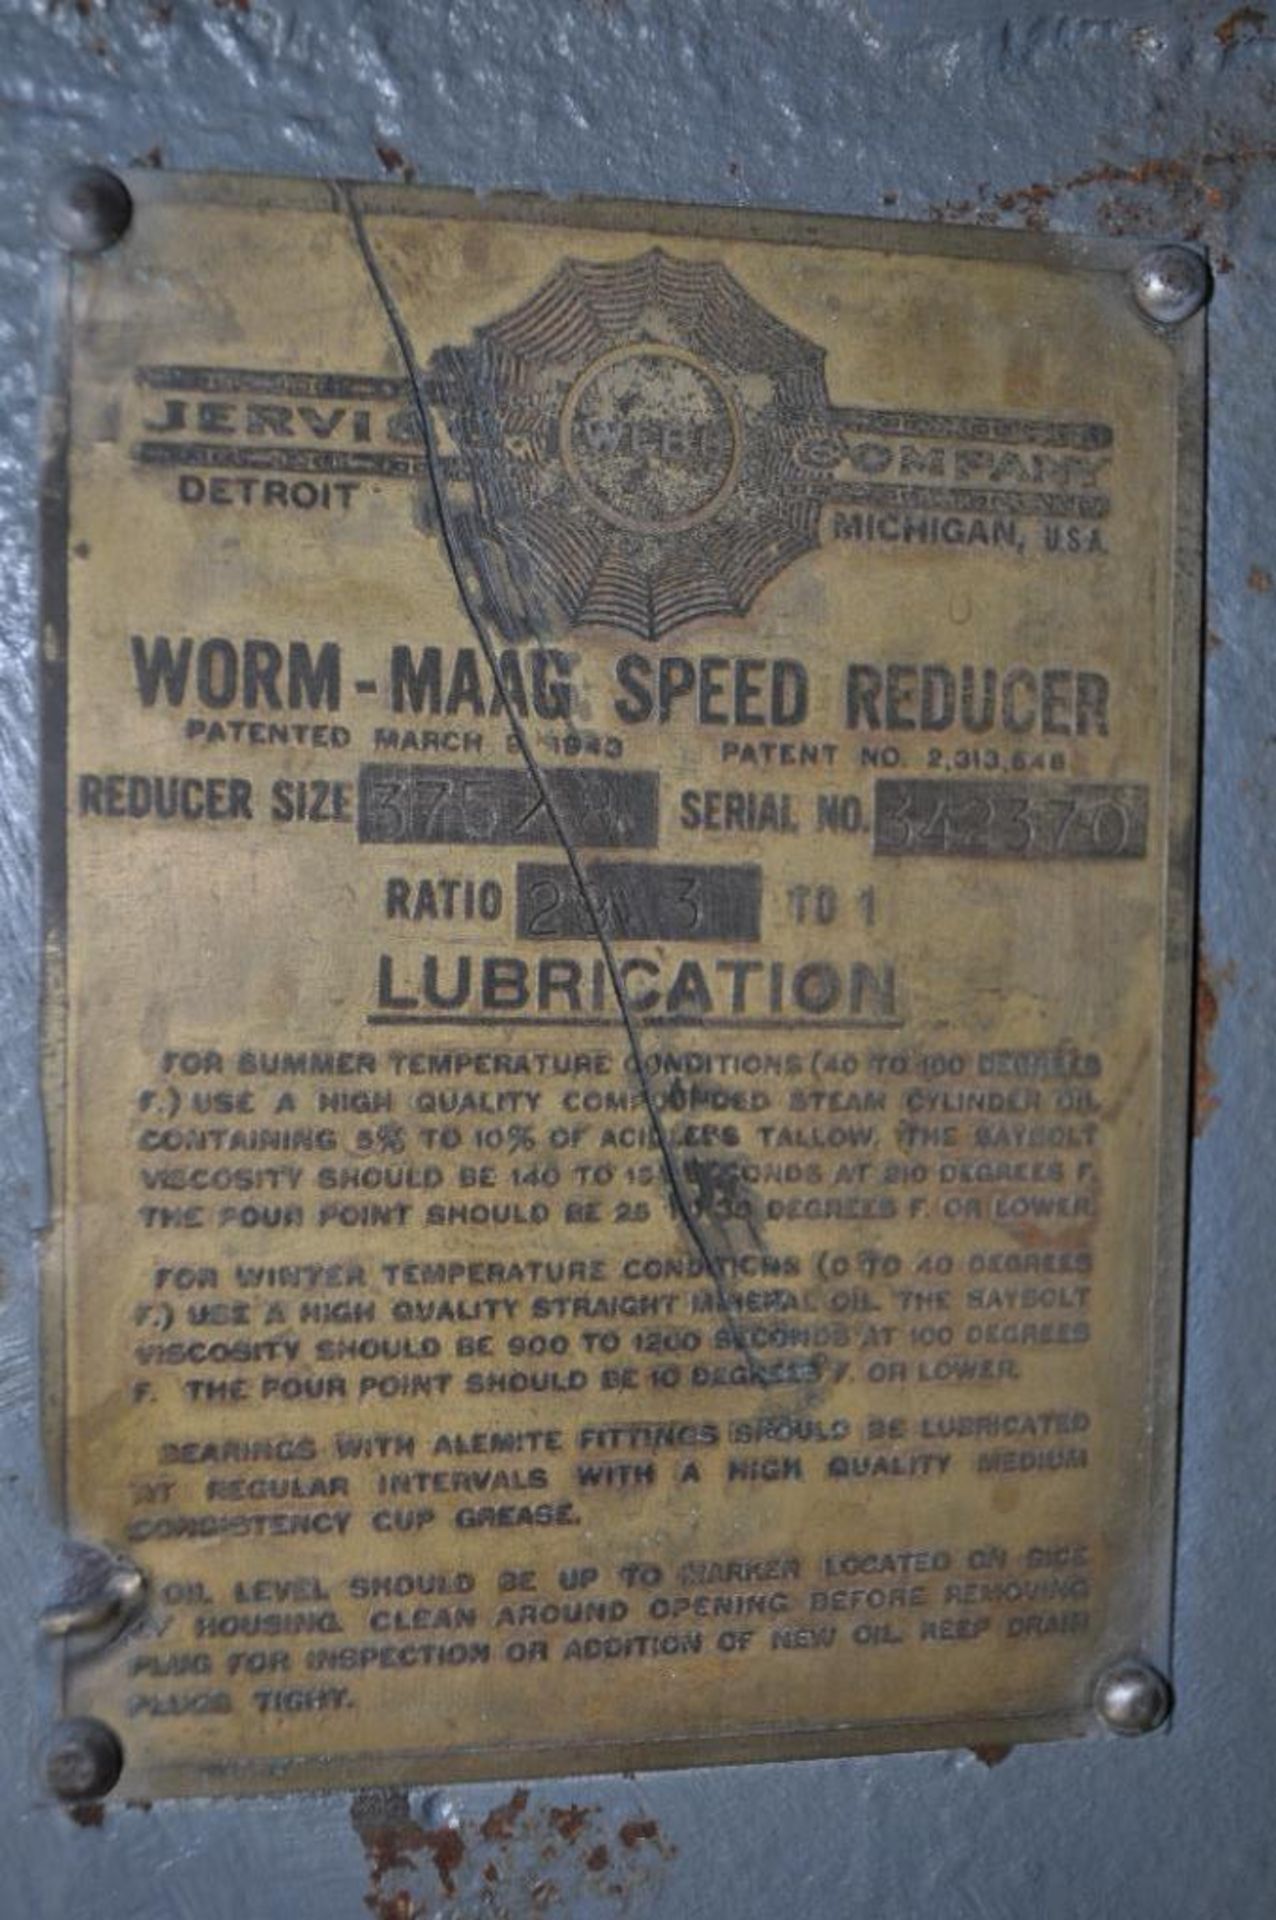 JERVIS WEBB WORM MAAG SPEED REDUCER, REDUCER SIZE: 375/8, RATIO 29.3:1 - Image 2 of 4